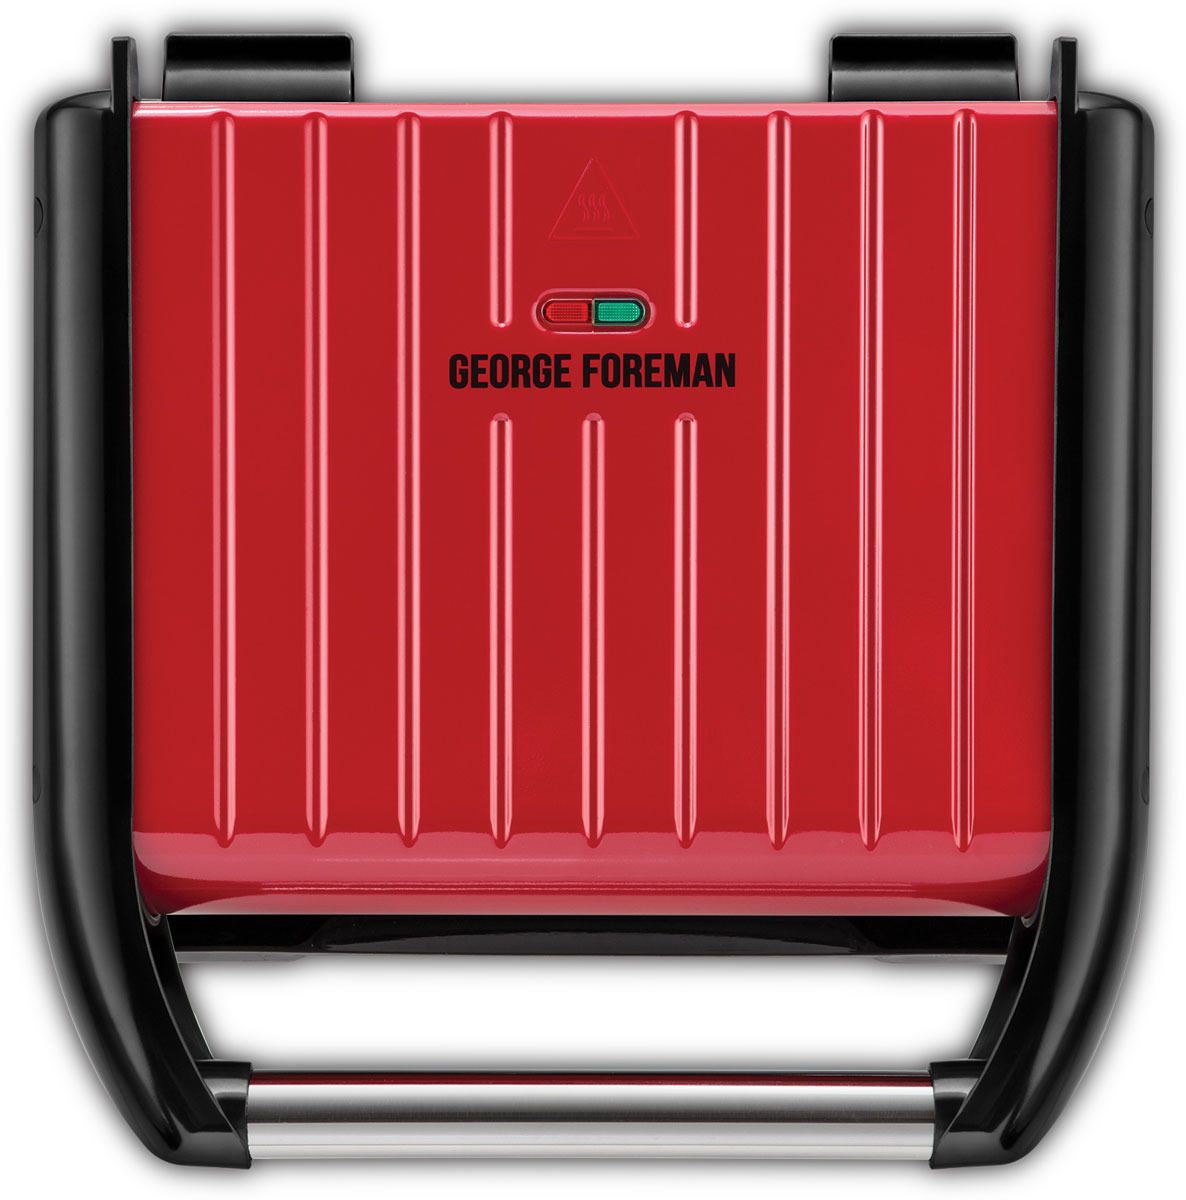  George Foreman 25040-56, Red